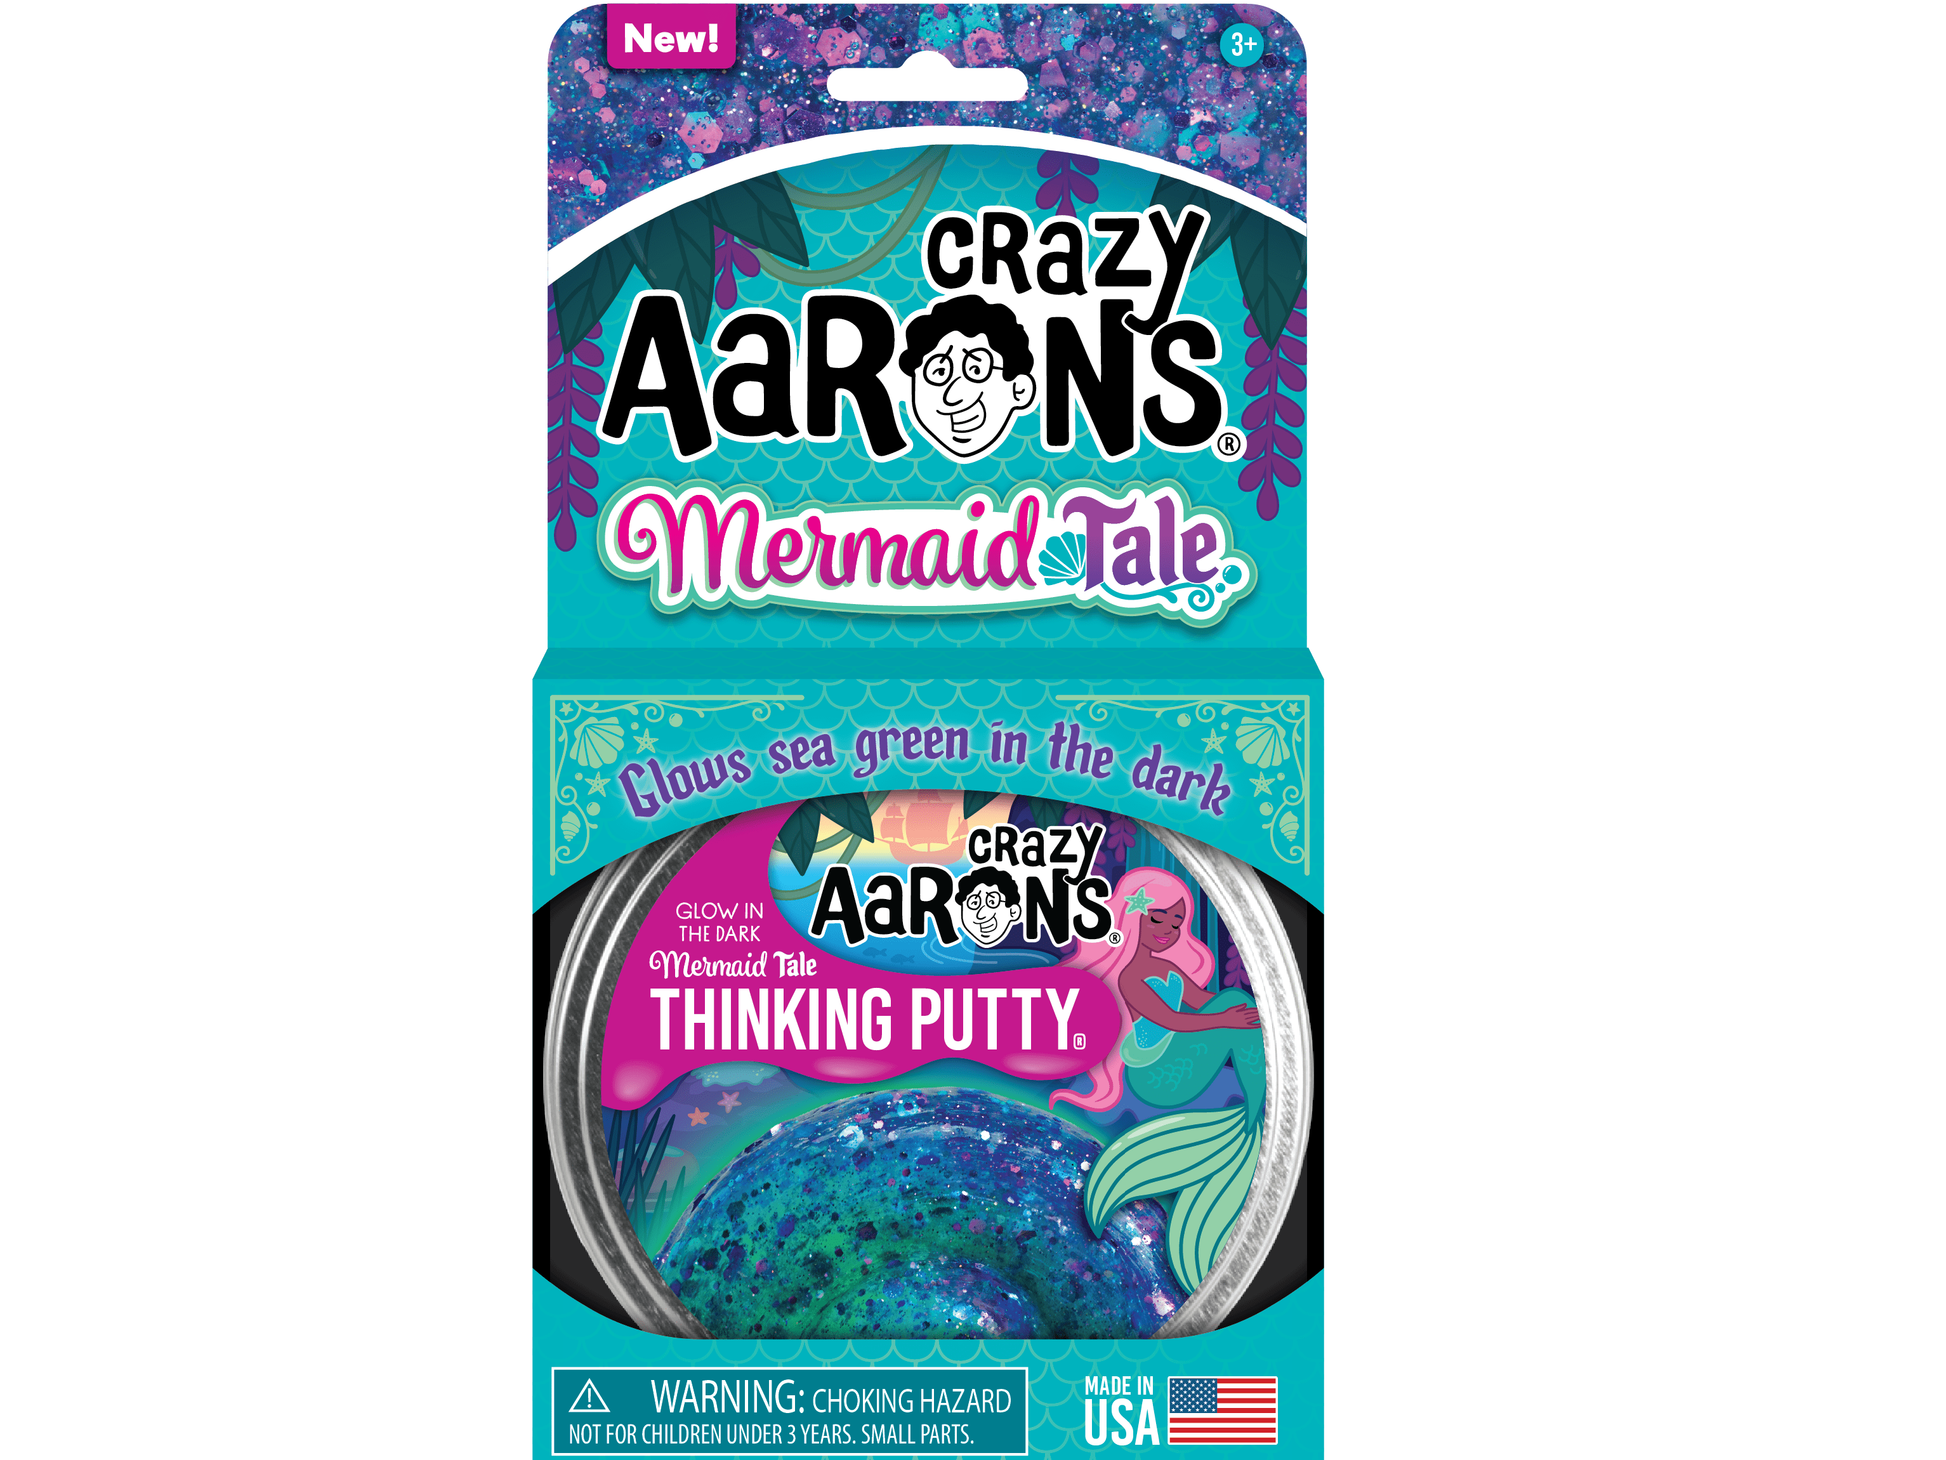 ME020 Crazy Aarons Putty MermaidTale_box